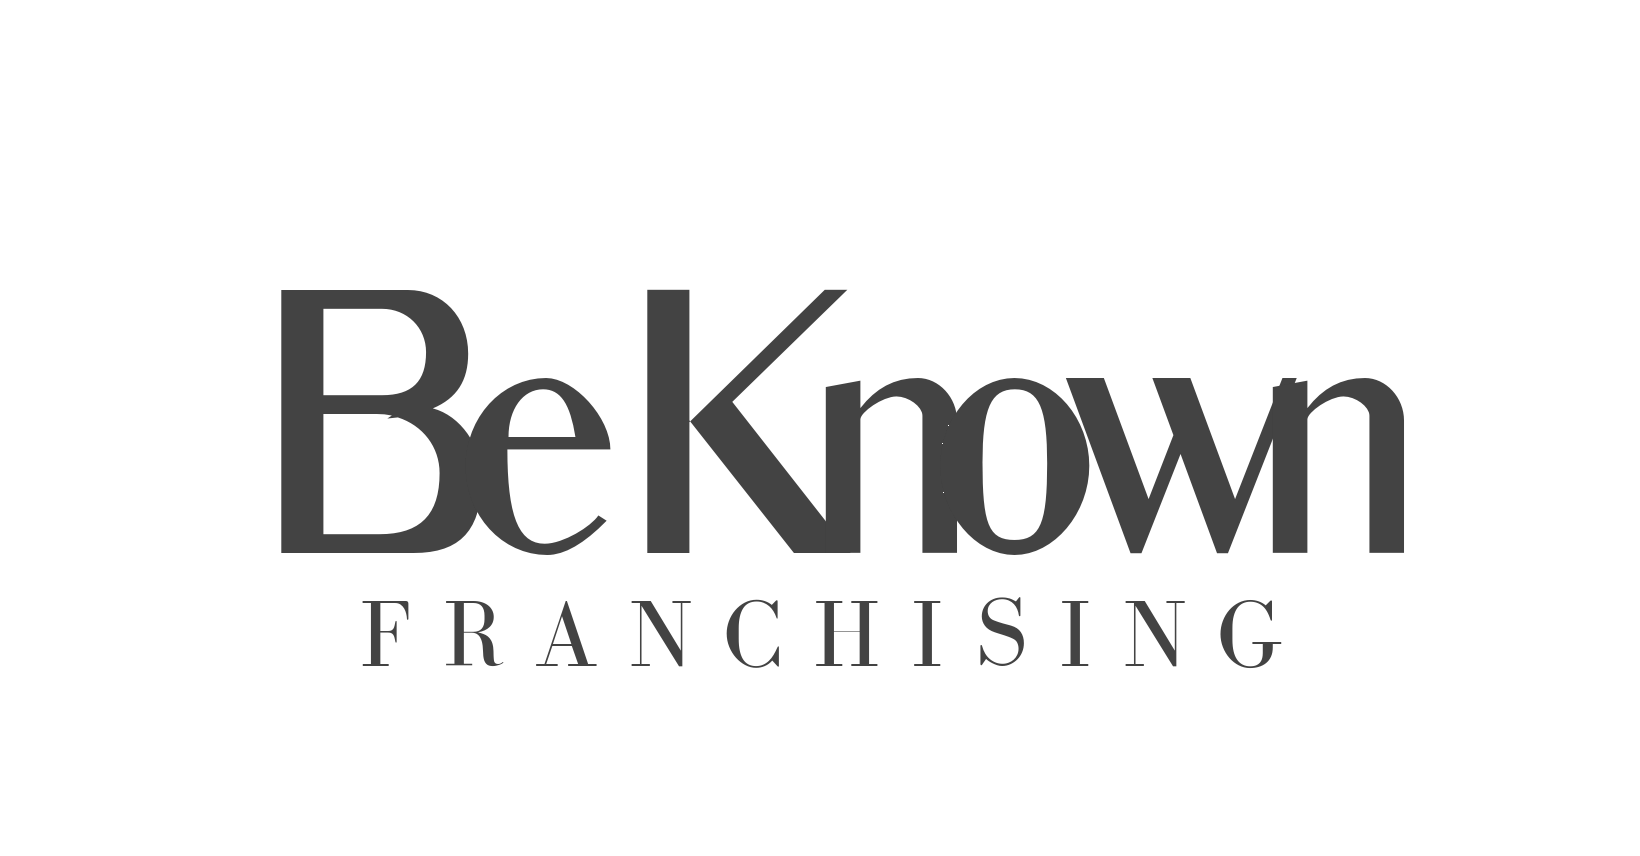 Be Known Franchising Logo